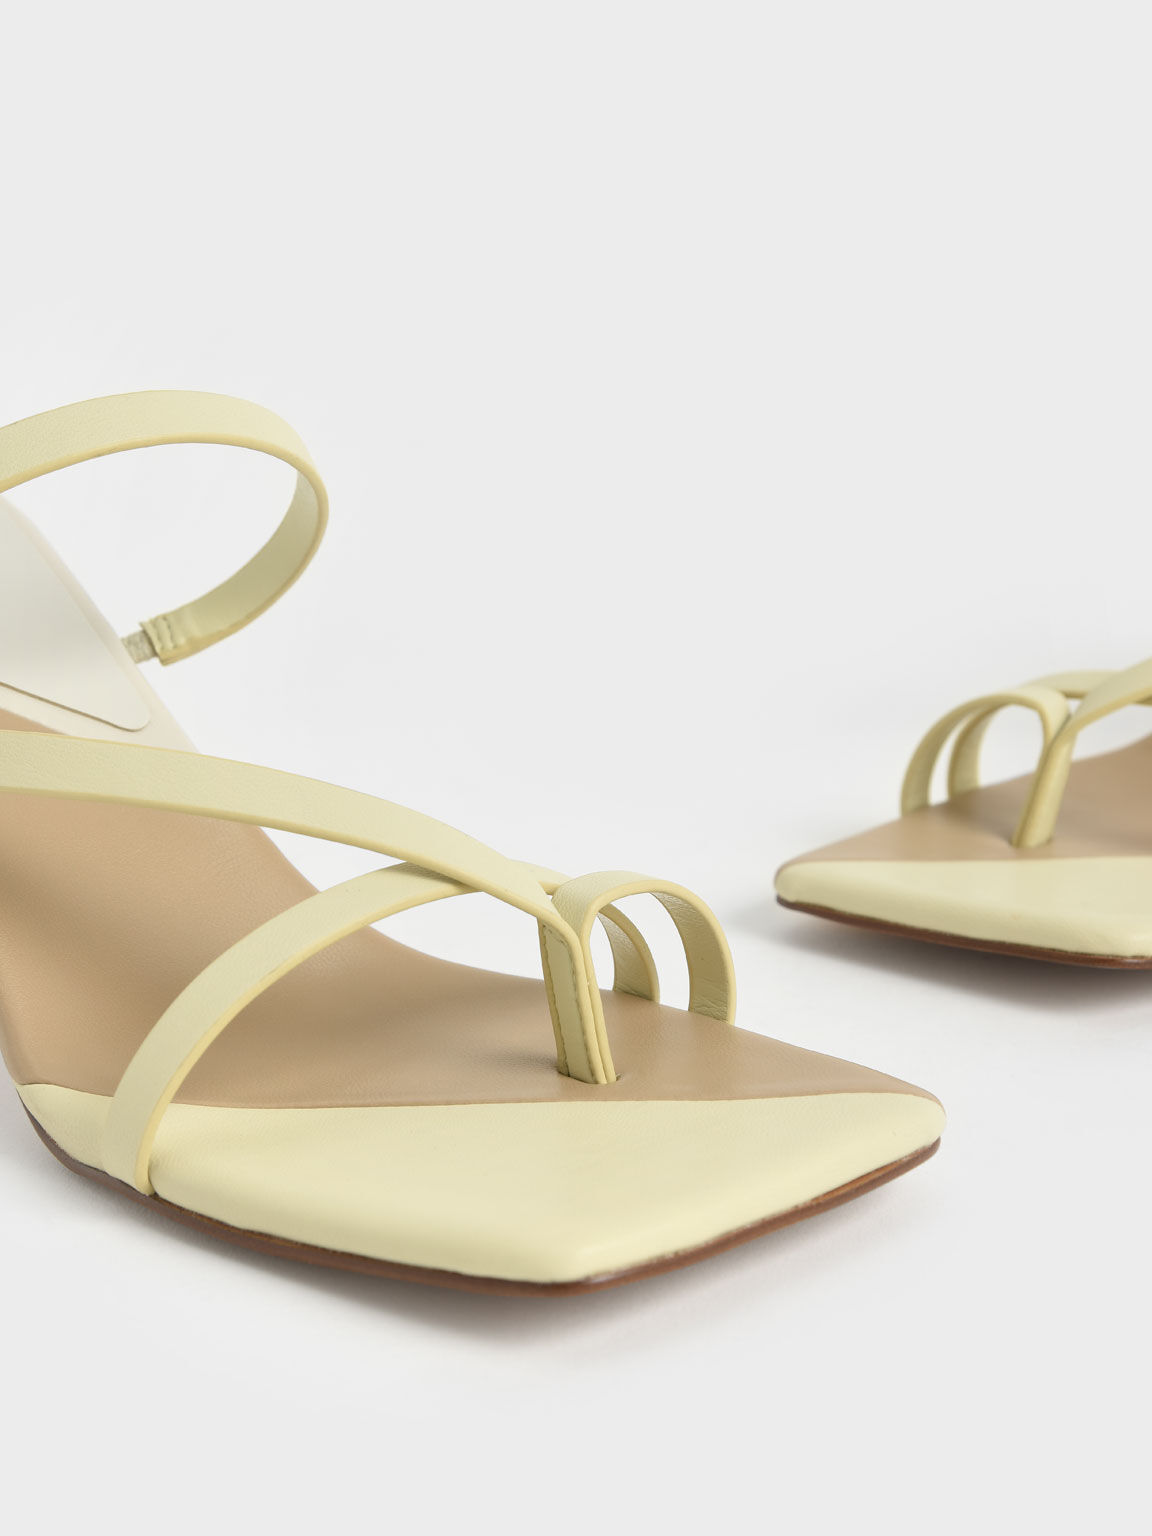 Strappy Toe Ring Sandals, Yellow, hi-res